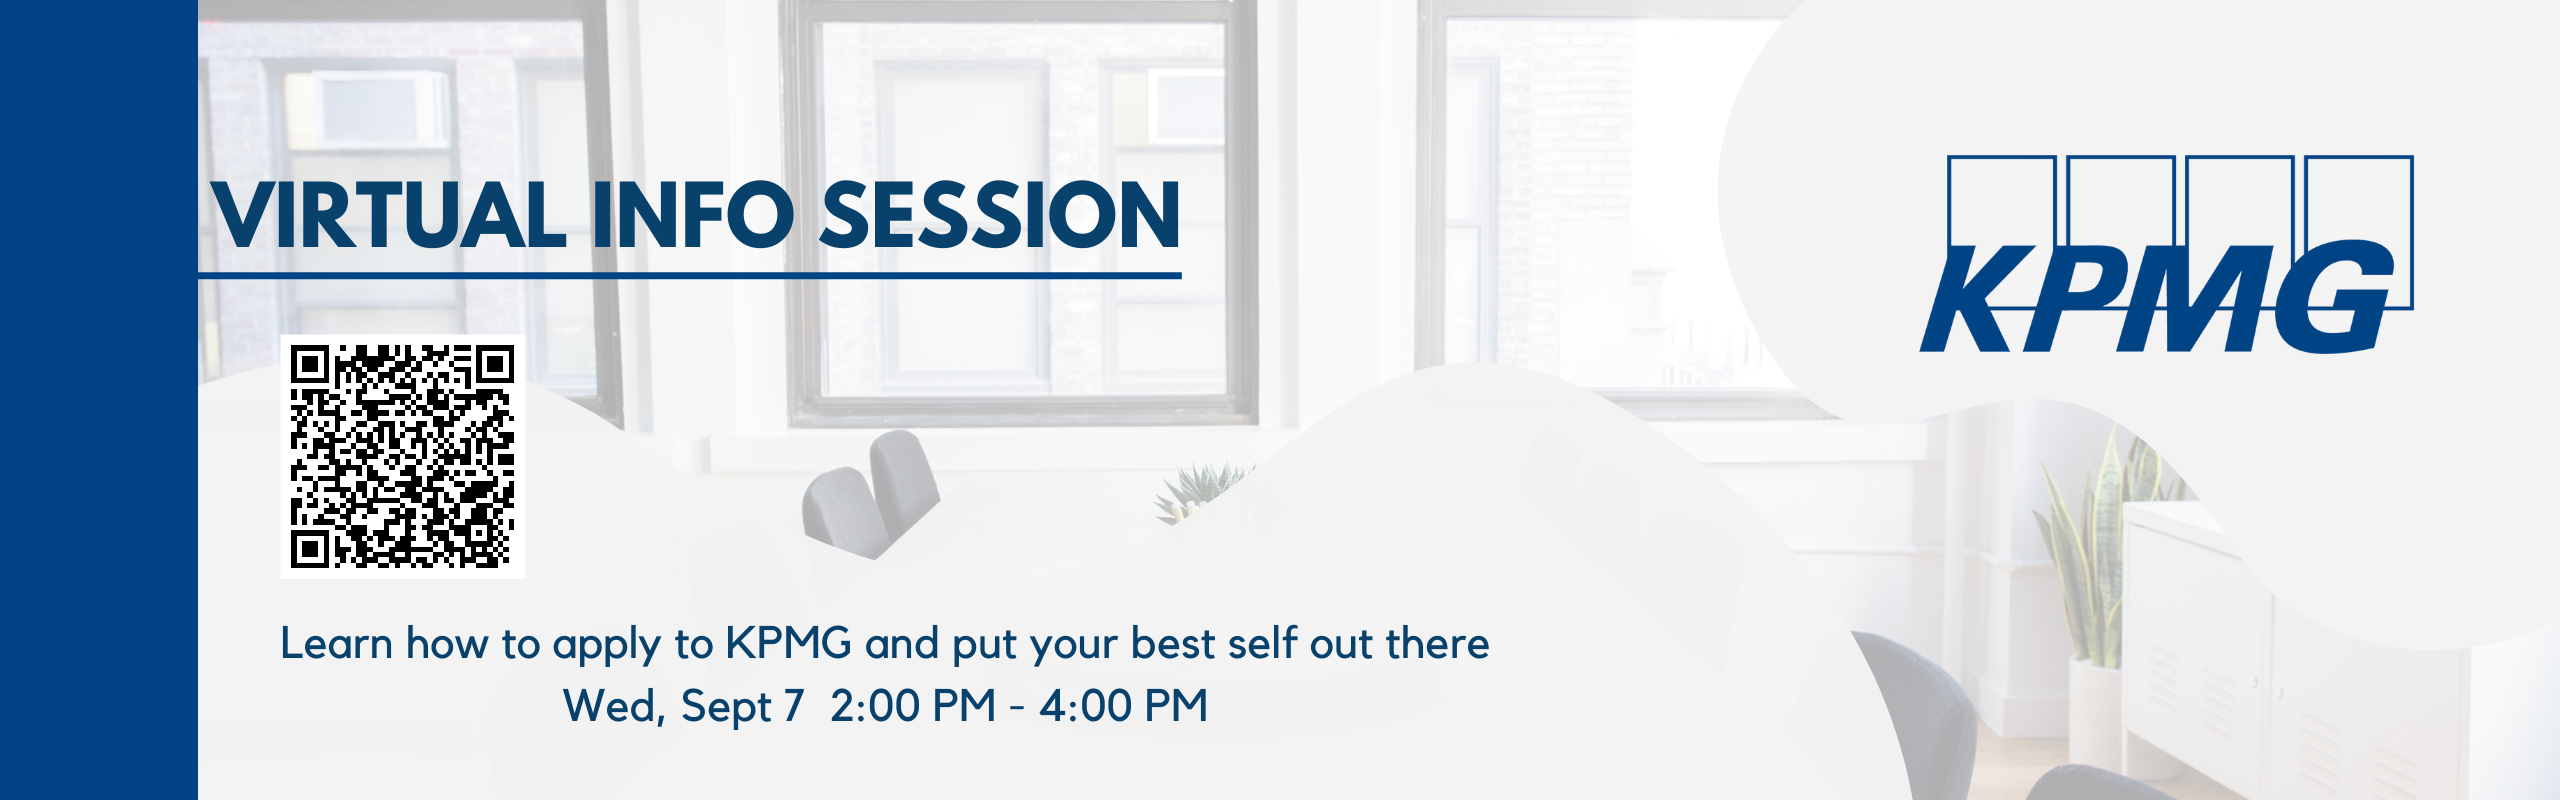 KPMG Virtual Info Session on Sept 7. Review EJN for more details